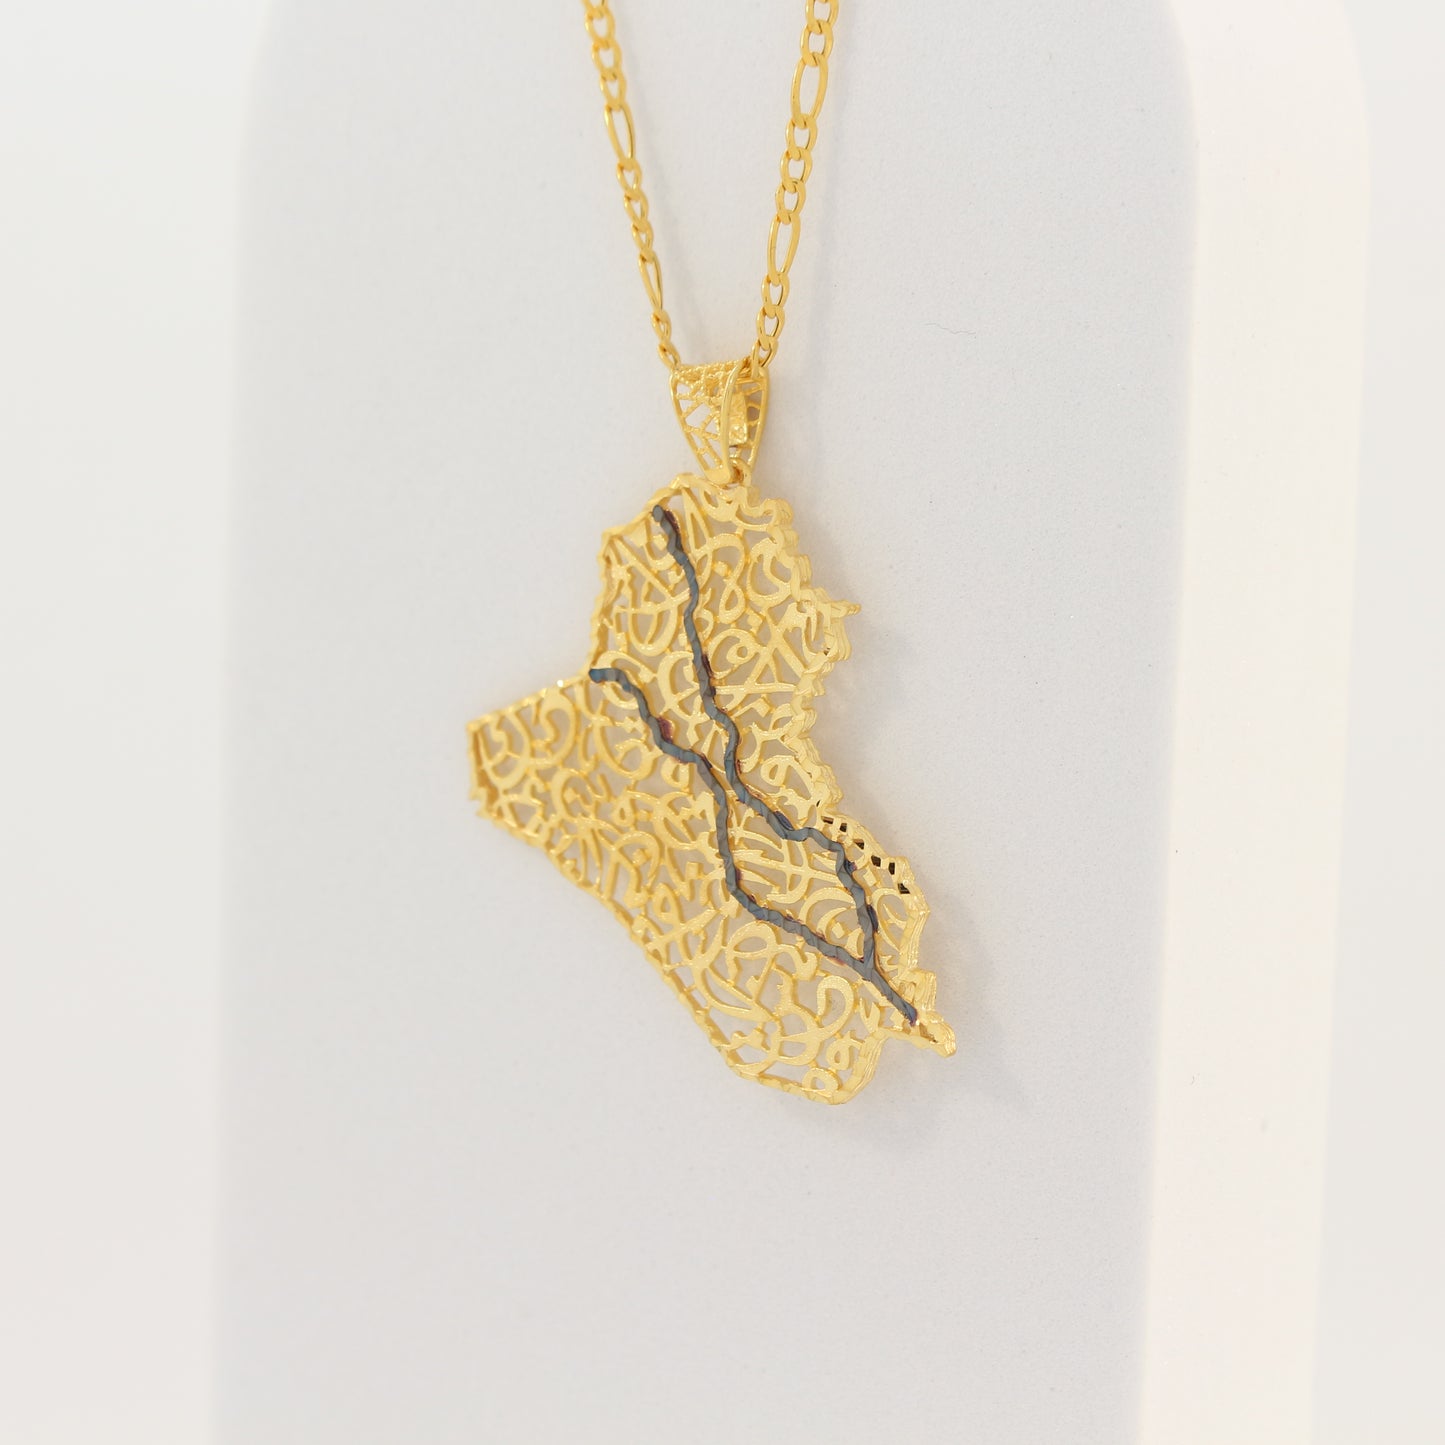 21K Gold Iraq Map Necklace